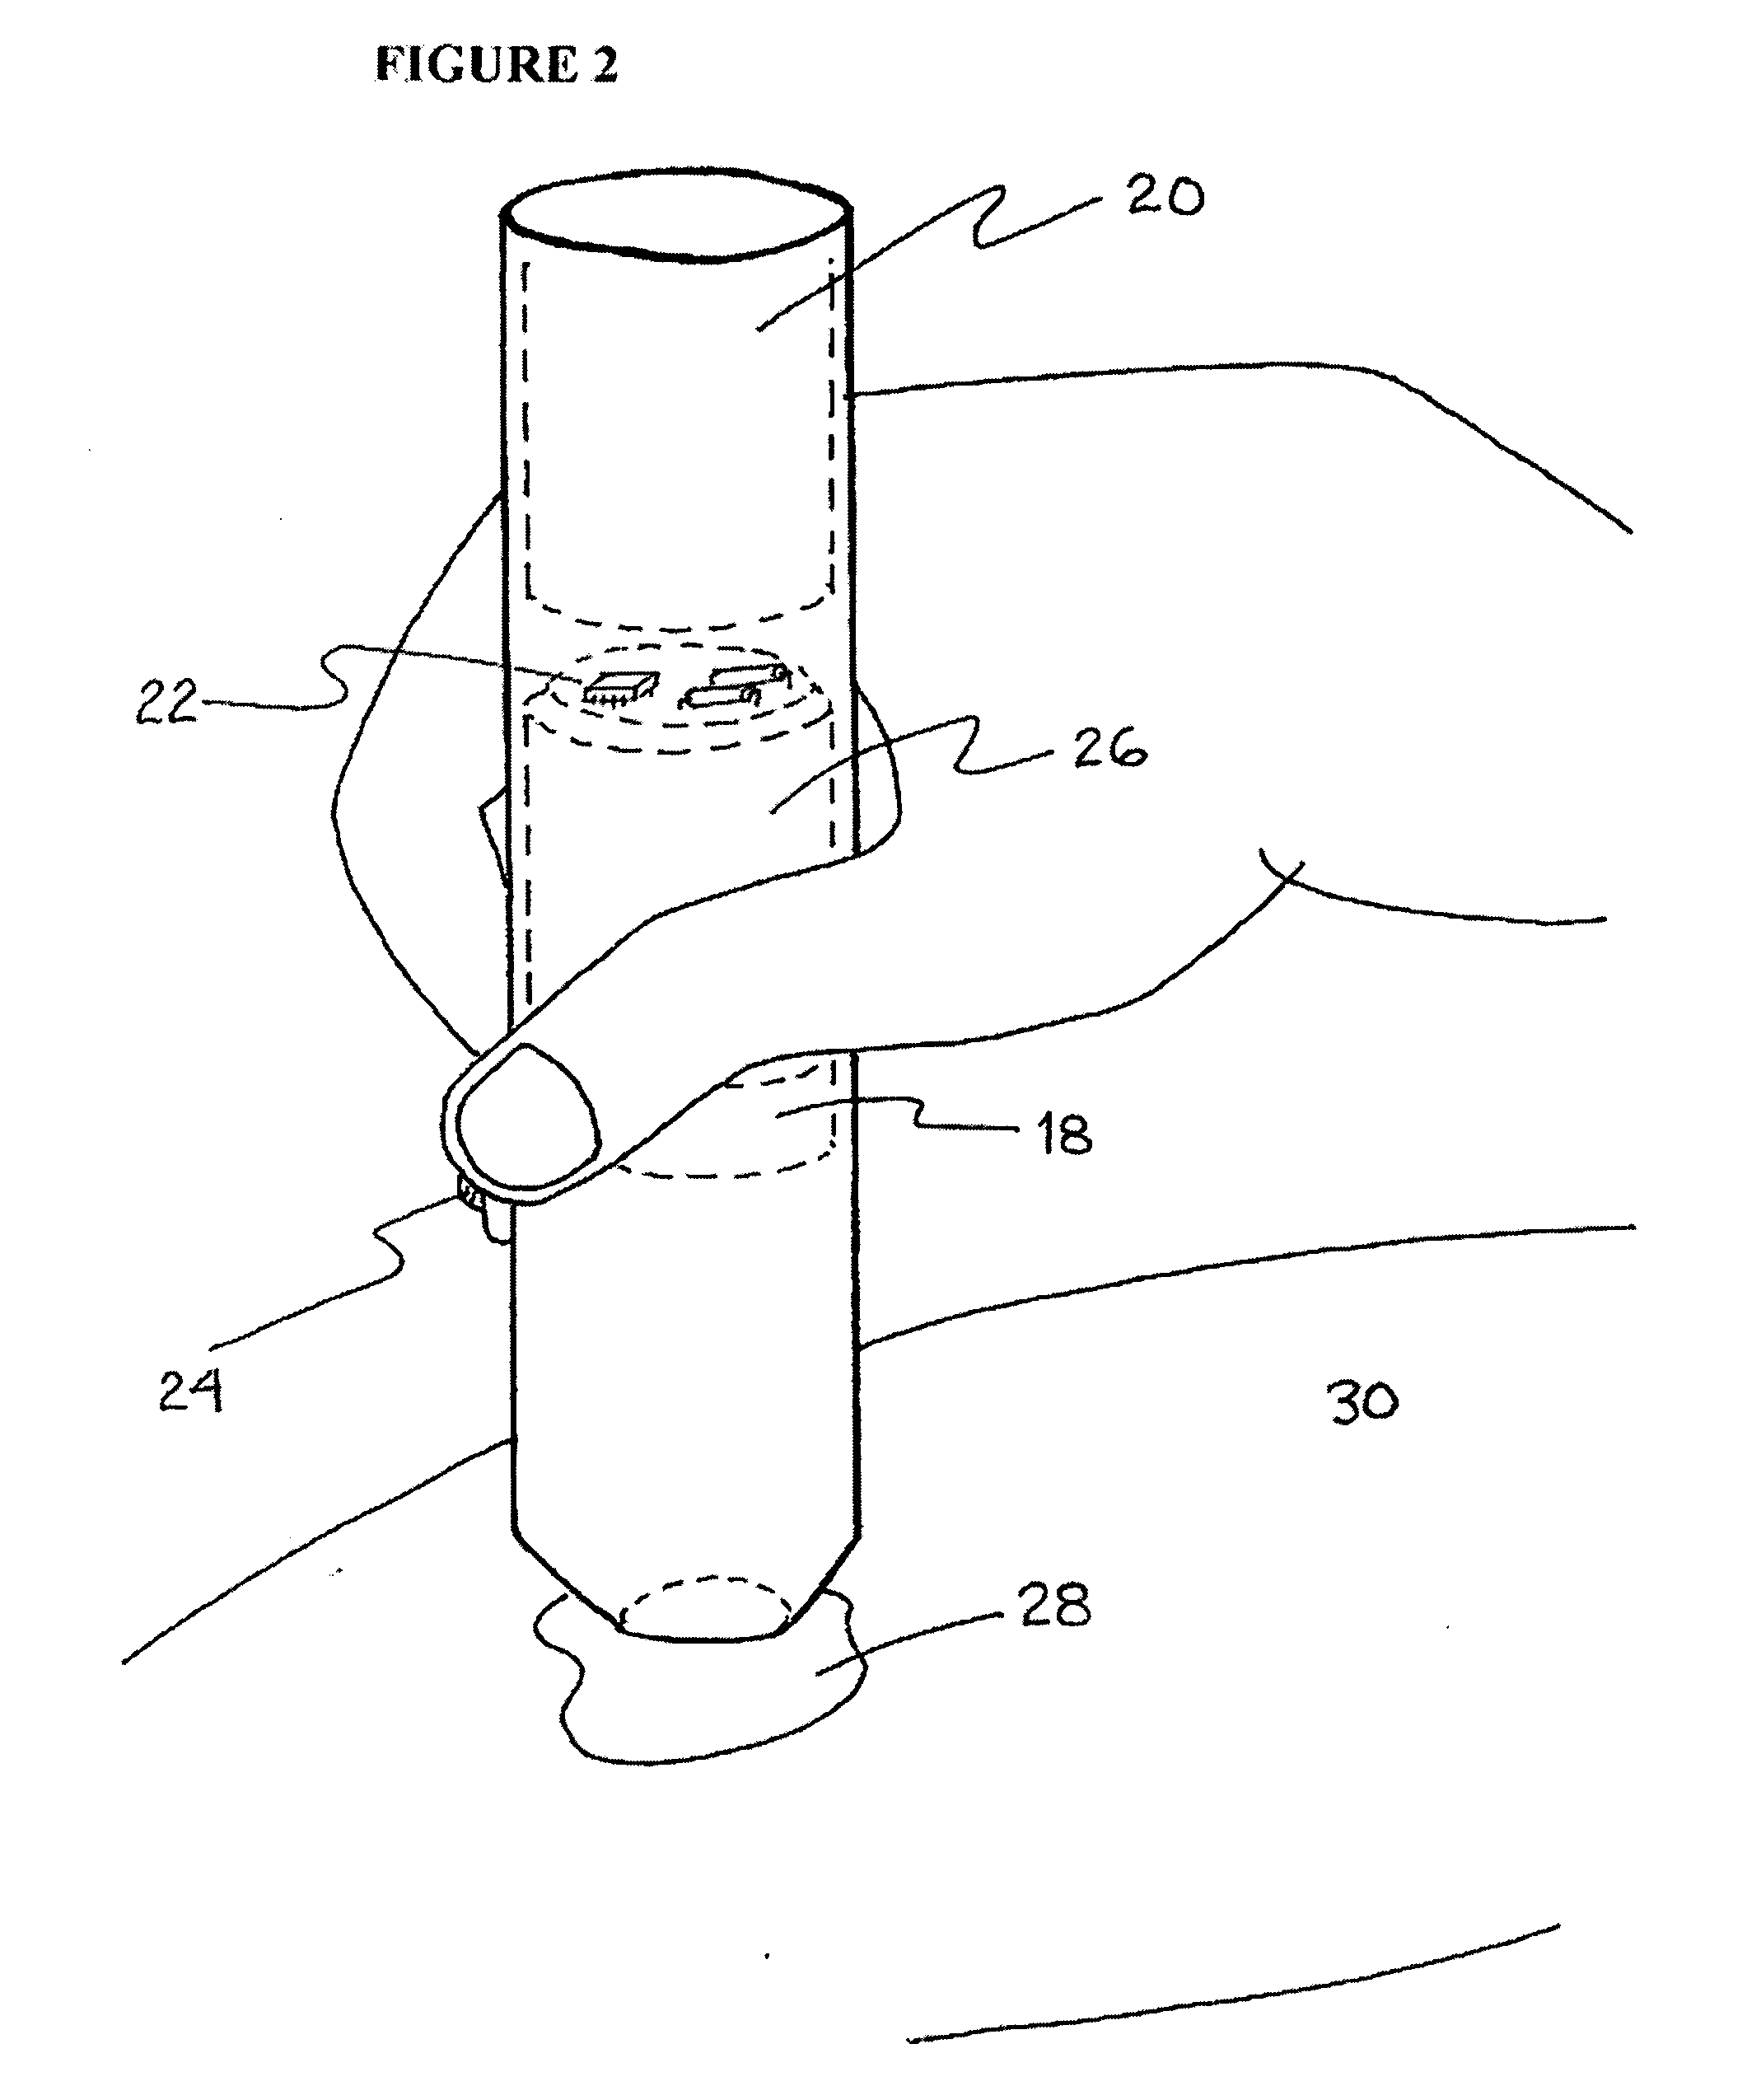 Method and apparatus for the treatment of benign pigmented lesions